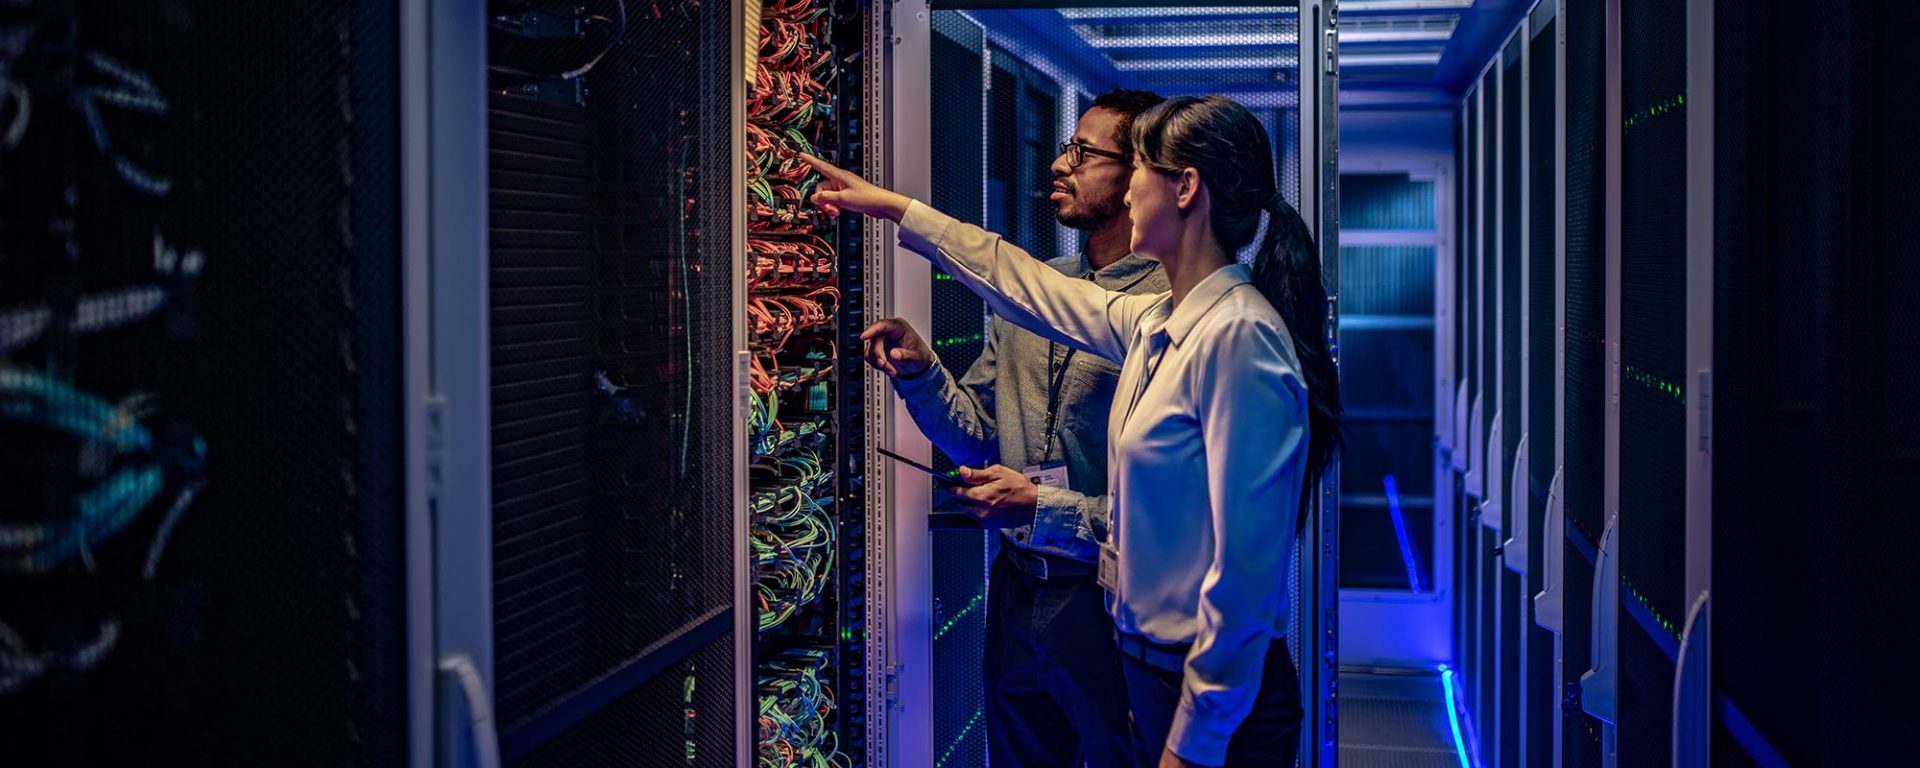 A woman and a man in front of a computing array, representing the future of information technology